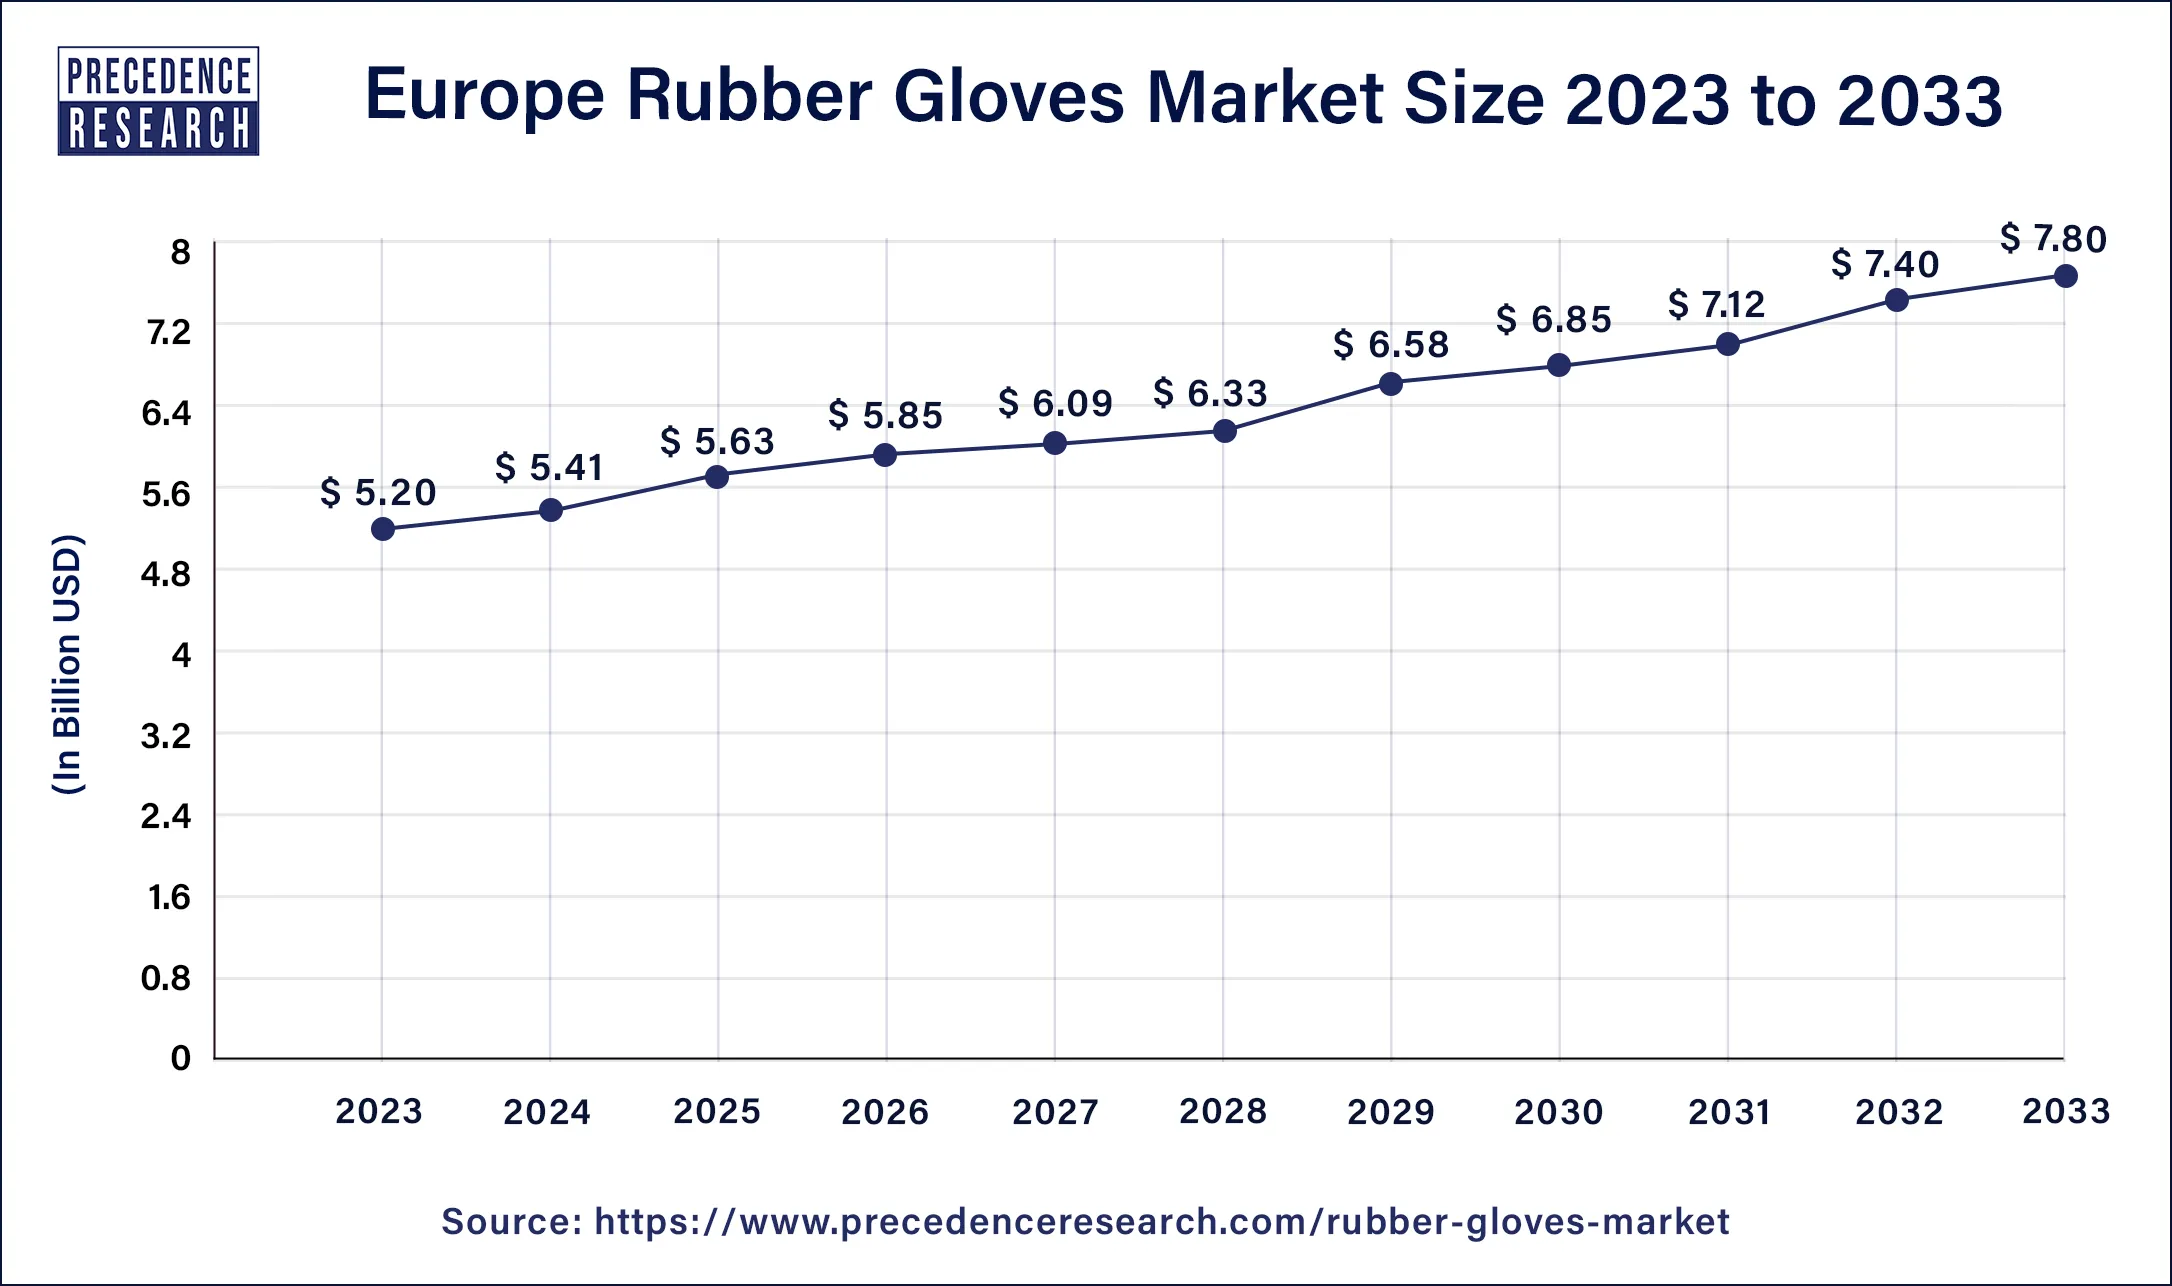 Europe Rubber Gloves Market Size 2024 to 2033